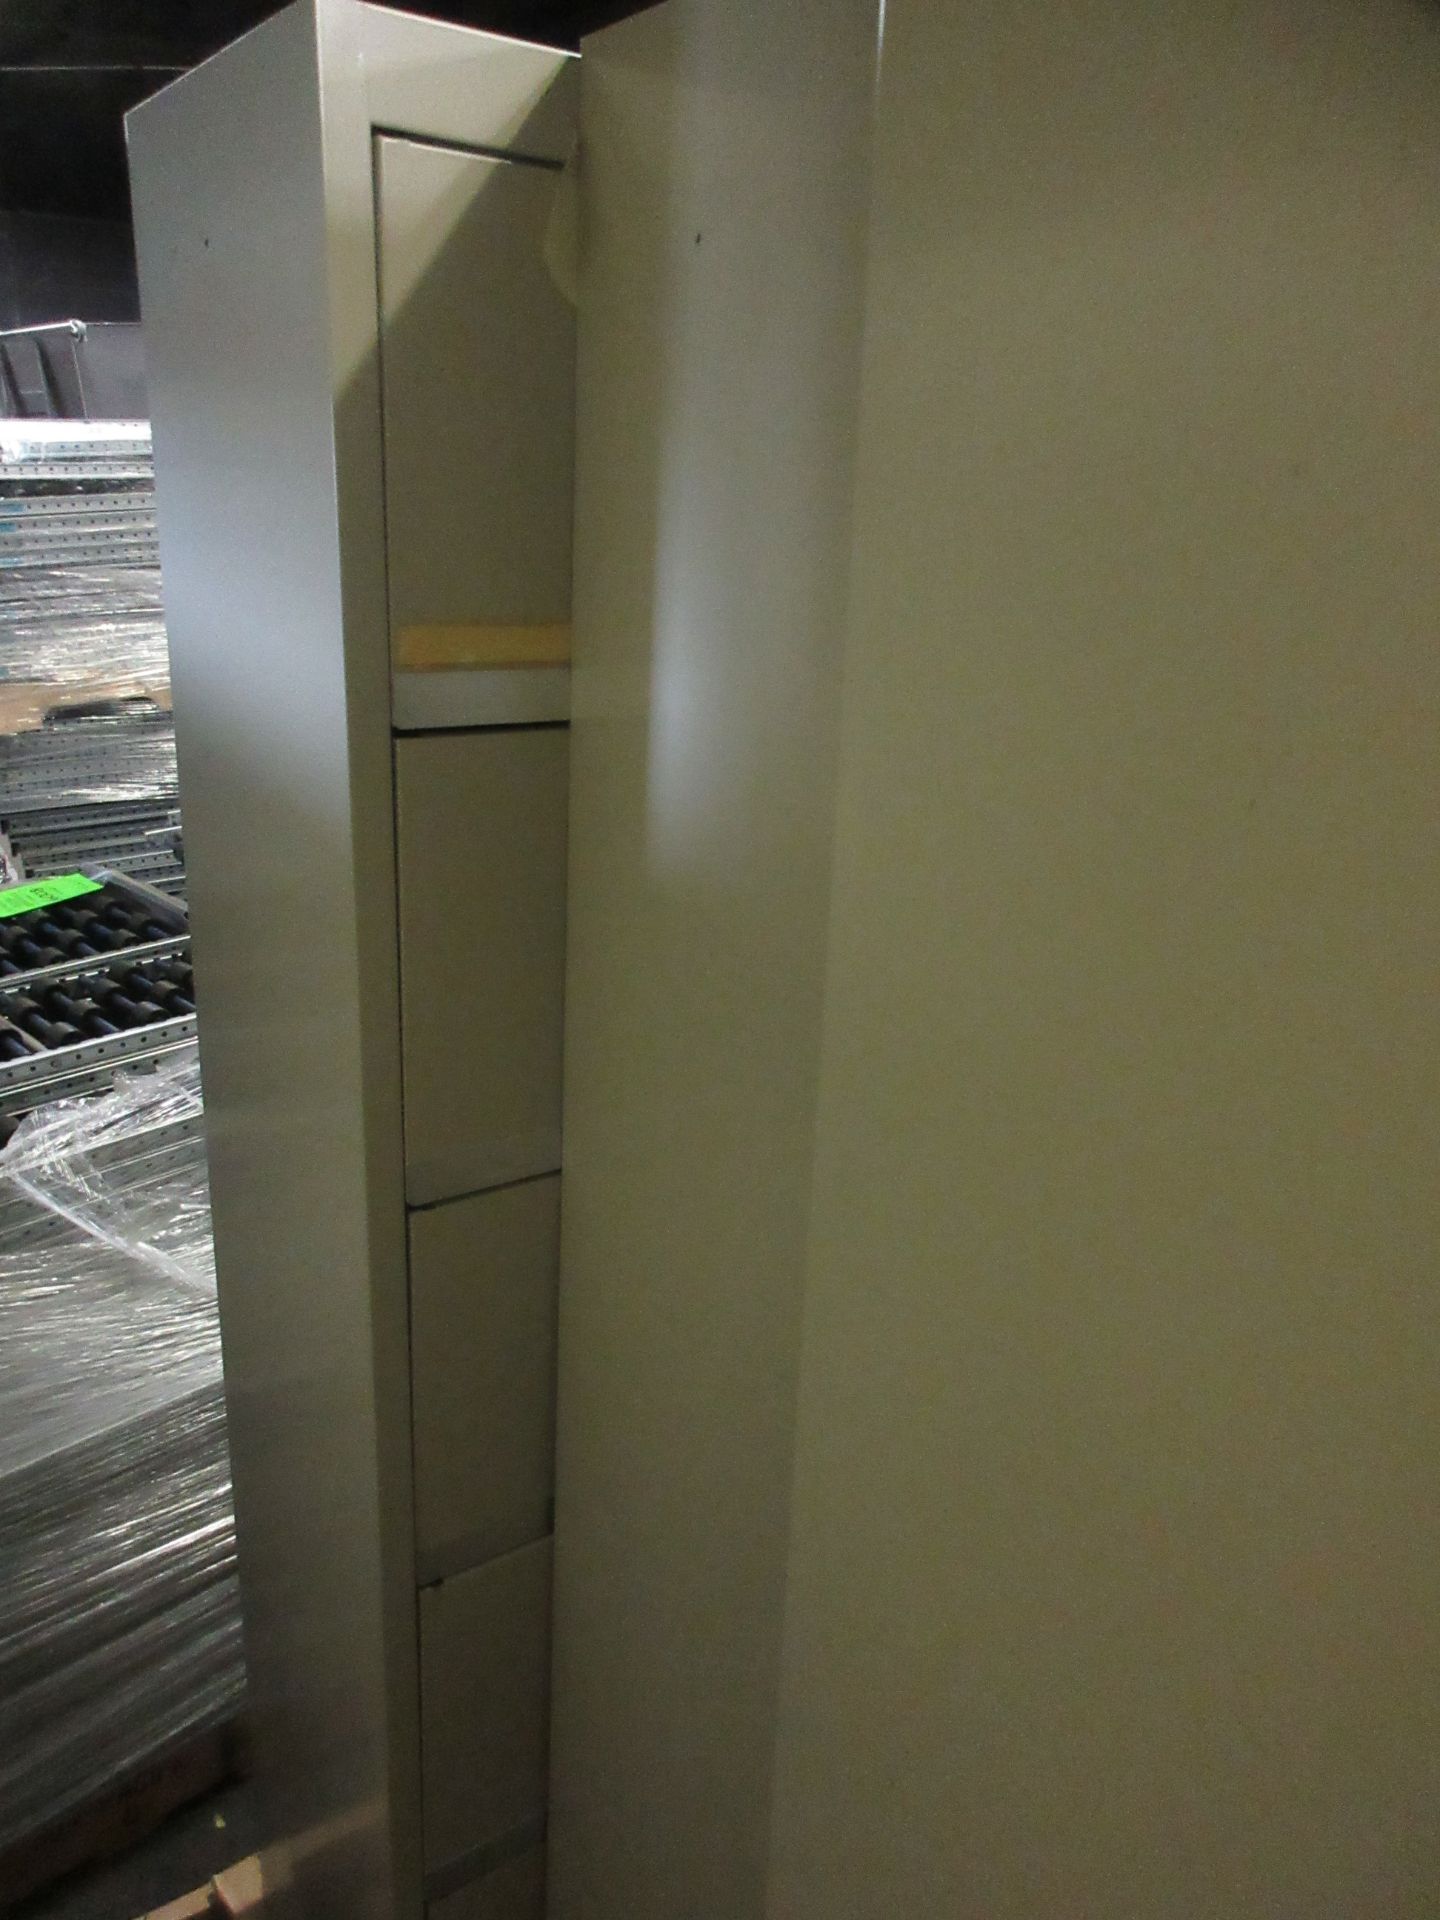 Set of three filing cabinets Sold as is Handling fees $0-$25 (located at 219 Murray Street, Fort - Image 3 of 3